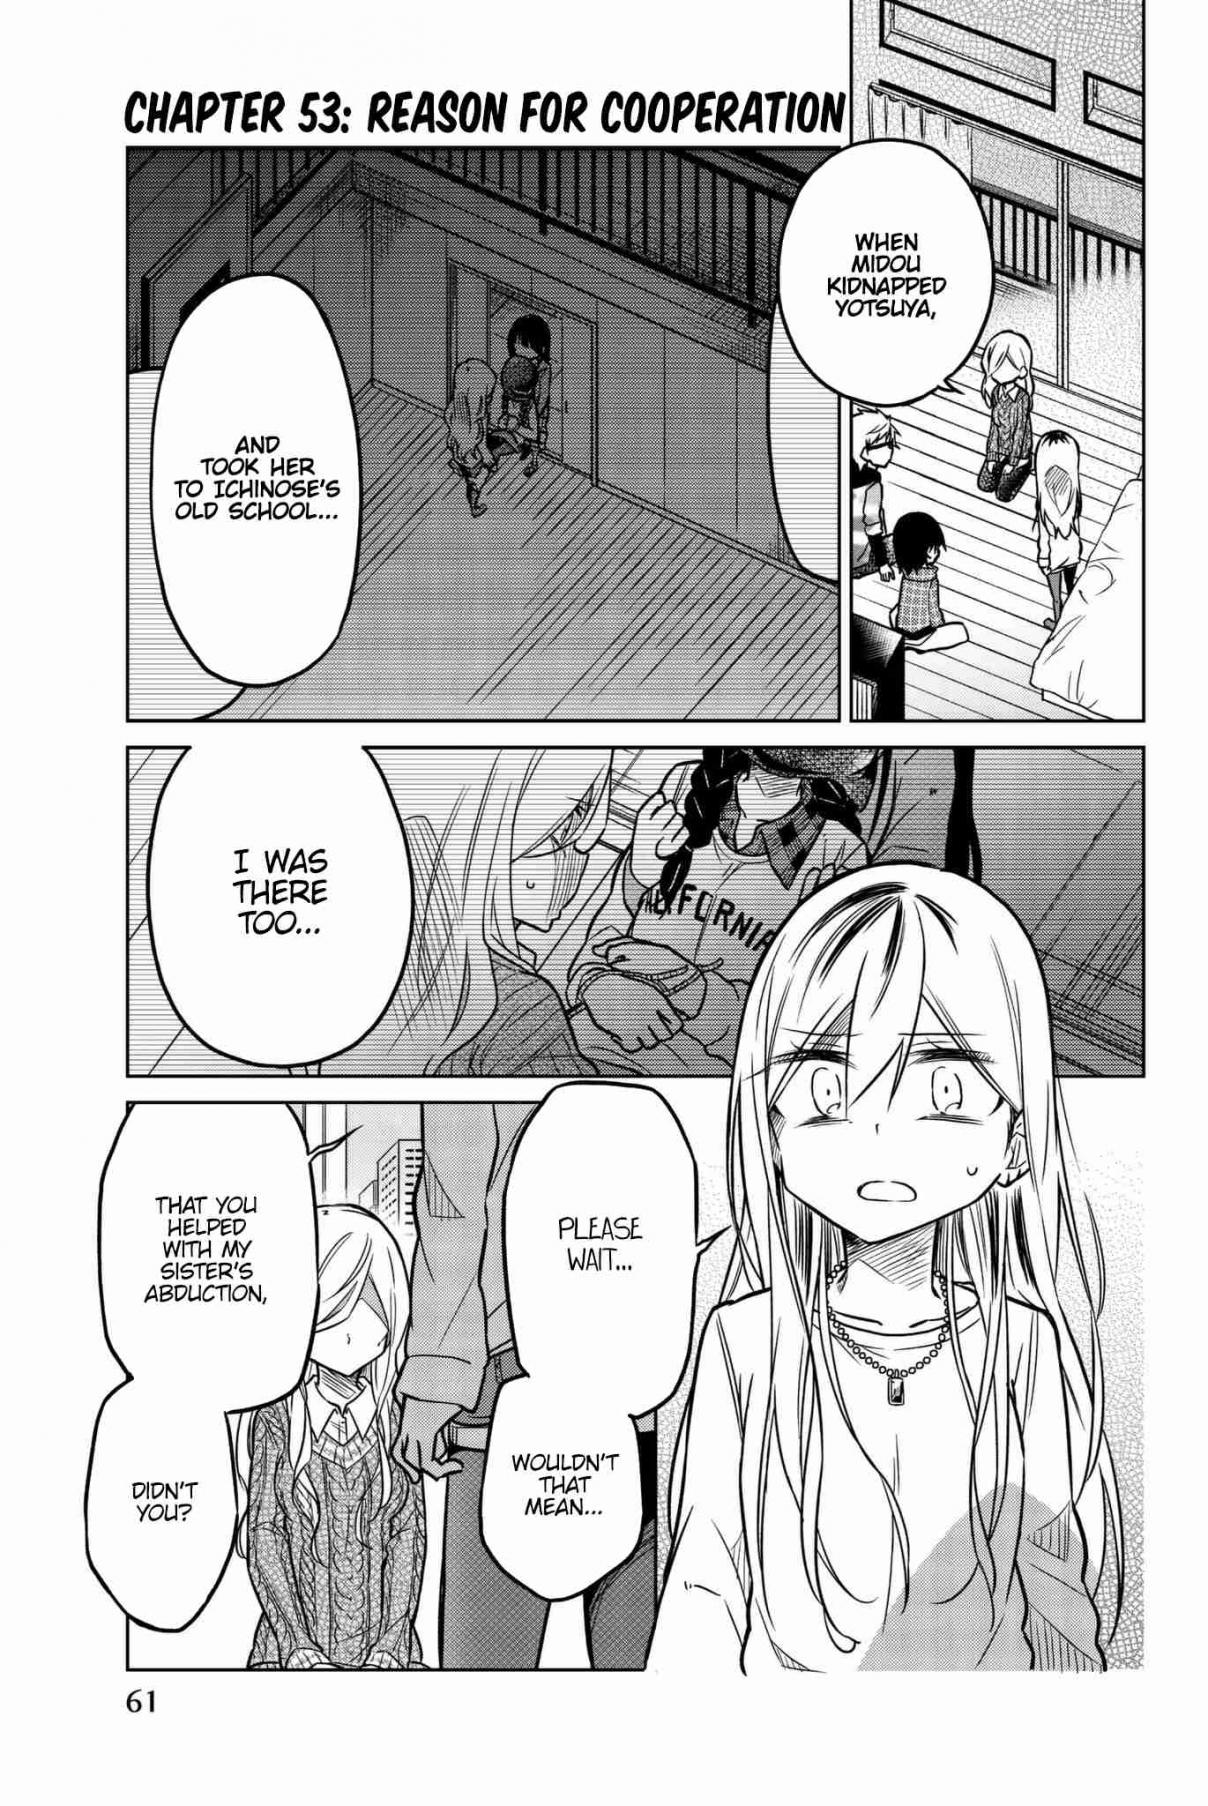 Ijousha no Ai Vol. 5 Ch. 53 The Reason for her Cooperation